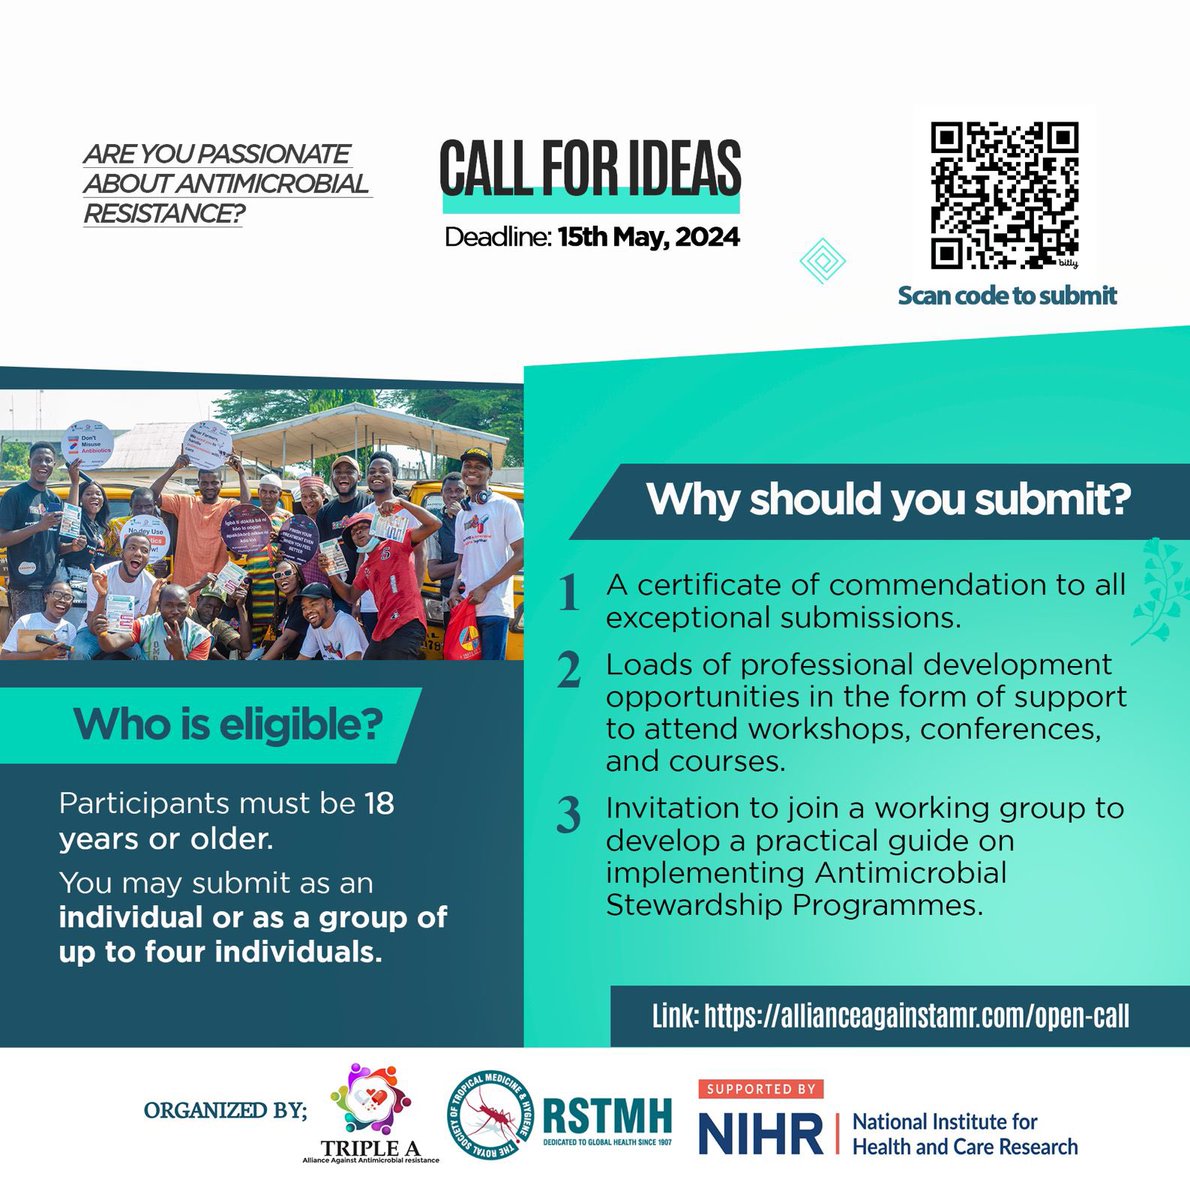 ‼️Deadline in 10 days Join this open call to participate in the development of a framework for implementing antimicrobial stewardship programmes across primary healthcare settings. Details here: allianceagainstamr.com/open-call/